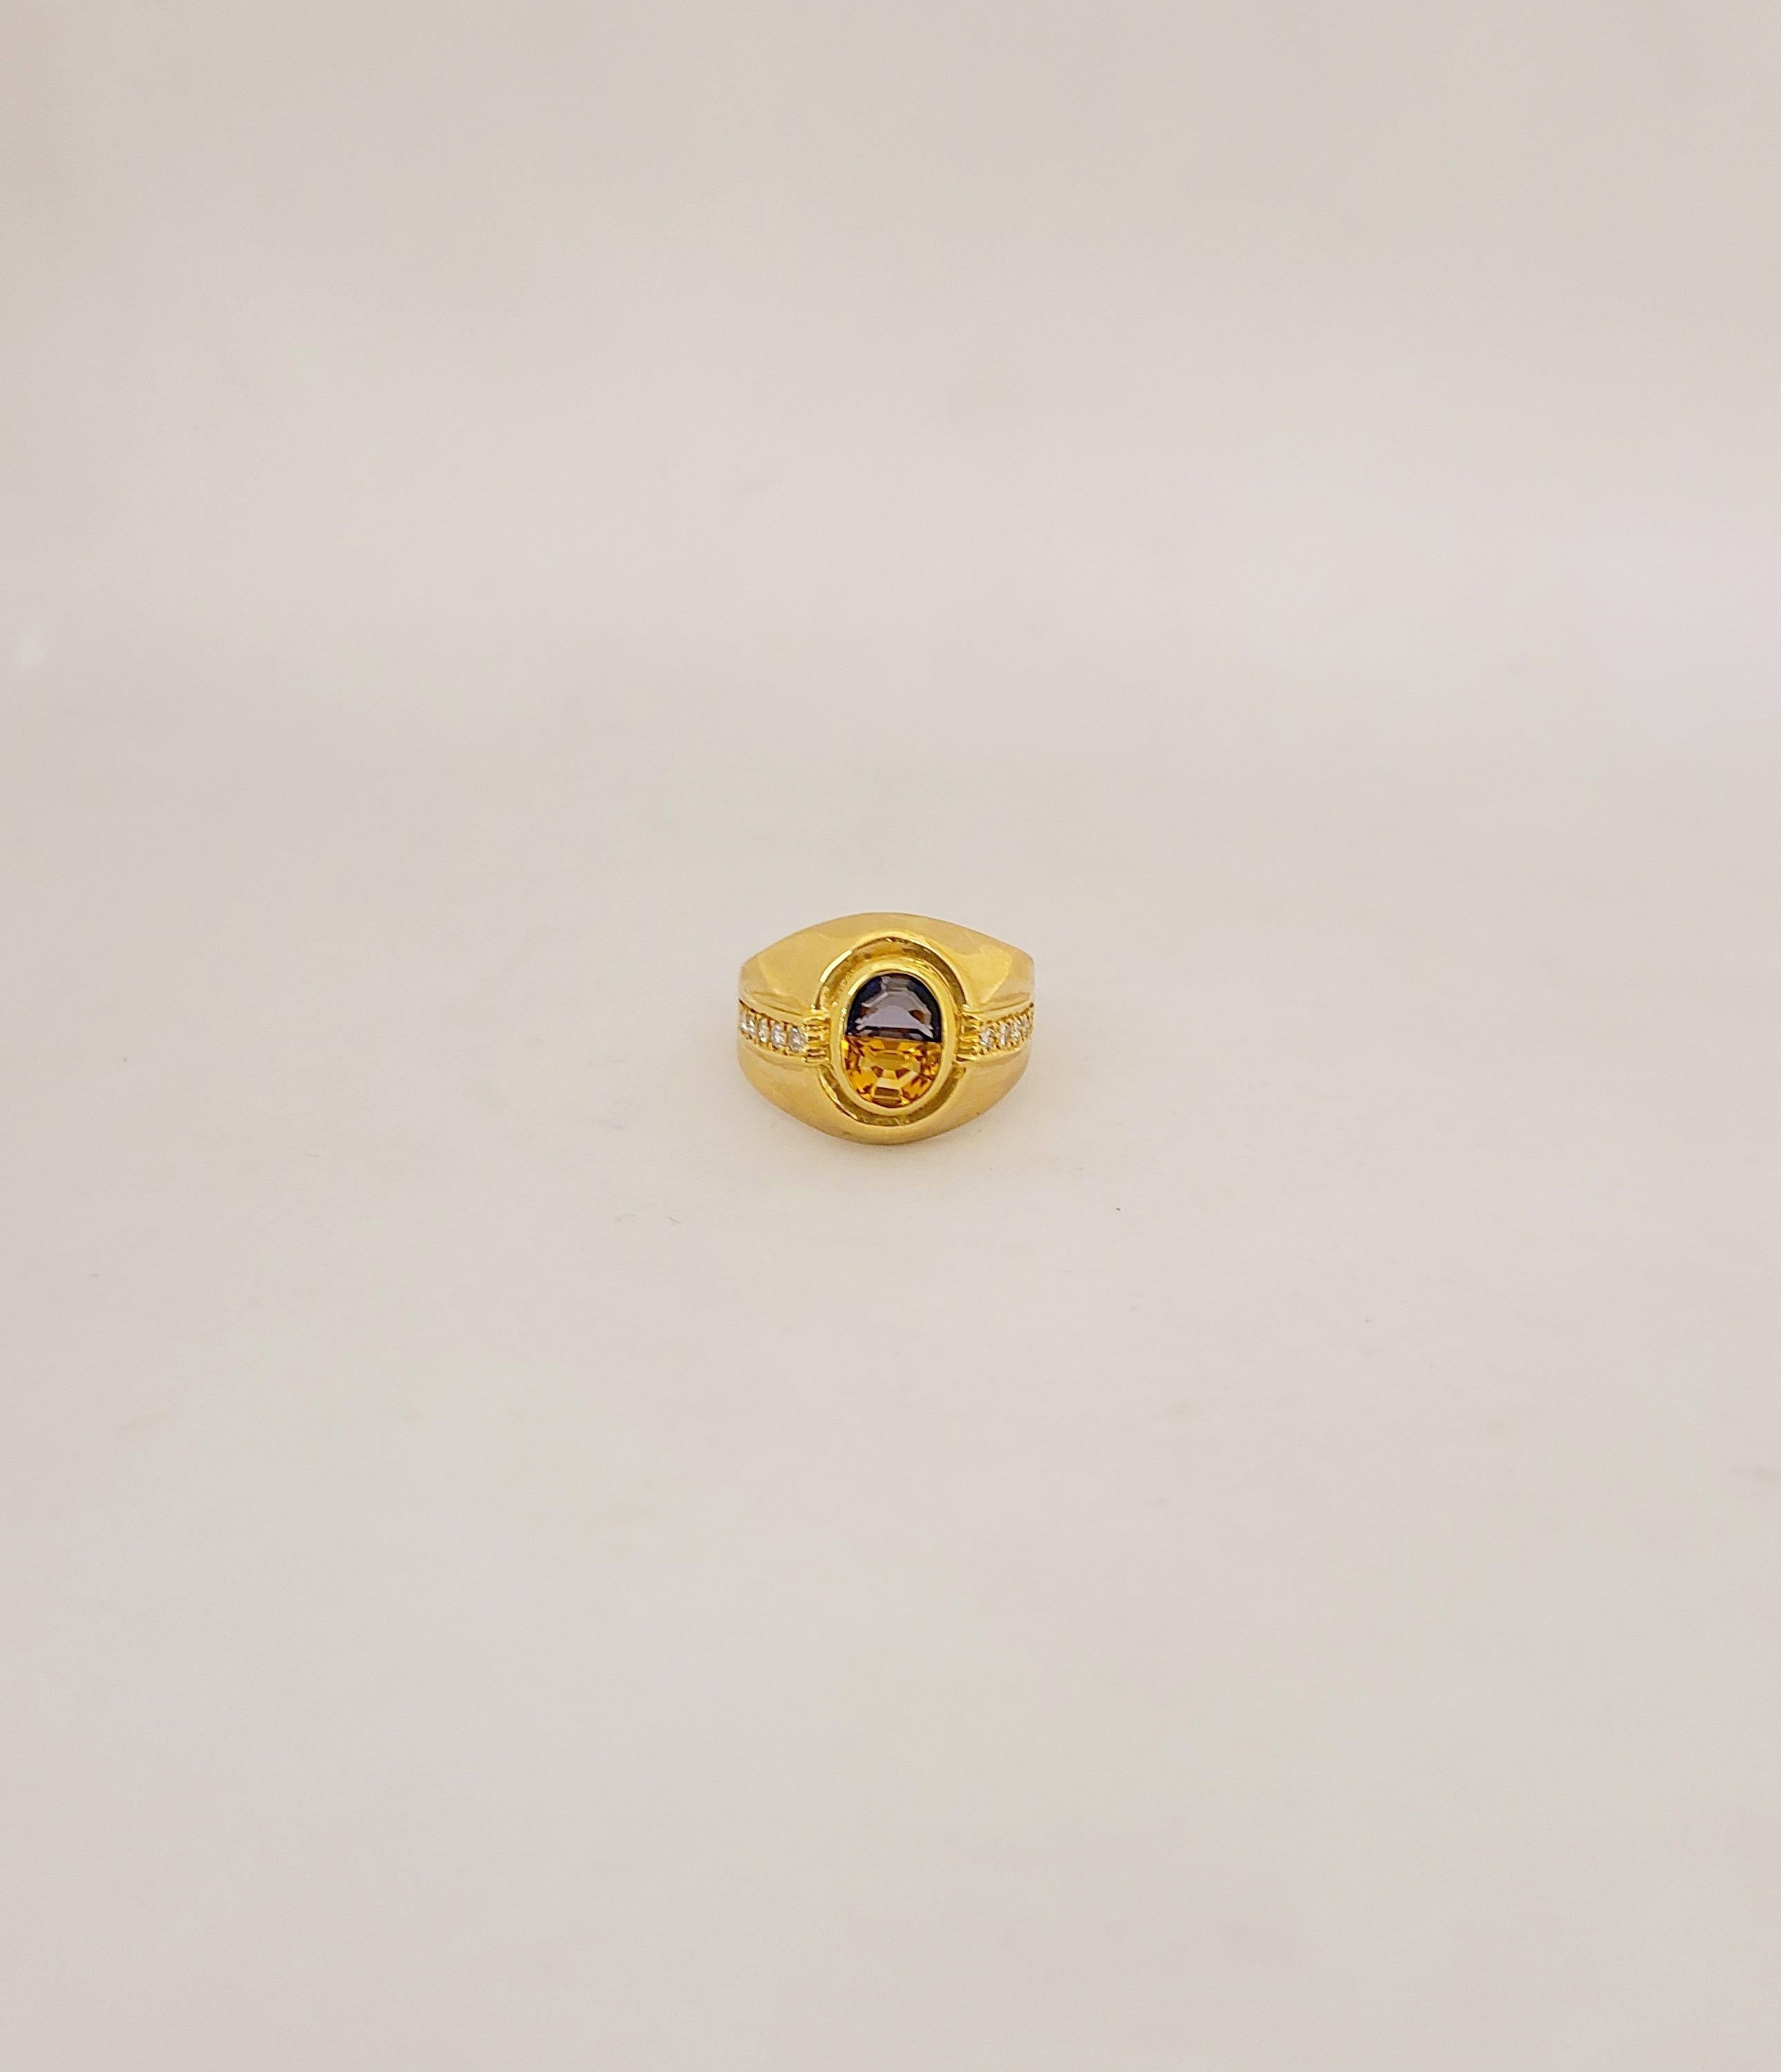 18KT Yellow Gold Ring centers a blue sapphire and citrine center - the stones are cut in a half moon shape forming an oval. The sides are flanked with 10 round brilliant diamonds totaling .26Ct.
Blue Sapphire: .65Ct
Citrine: .65Ct.
Ring Size 7. 75
